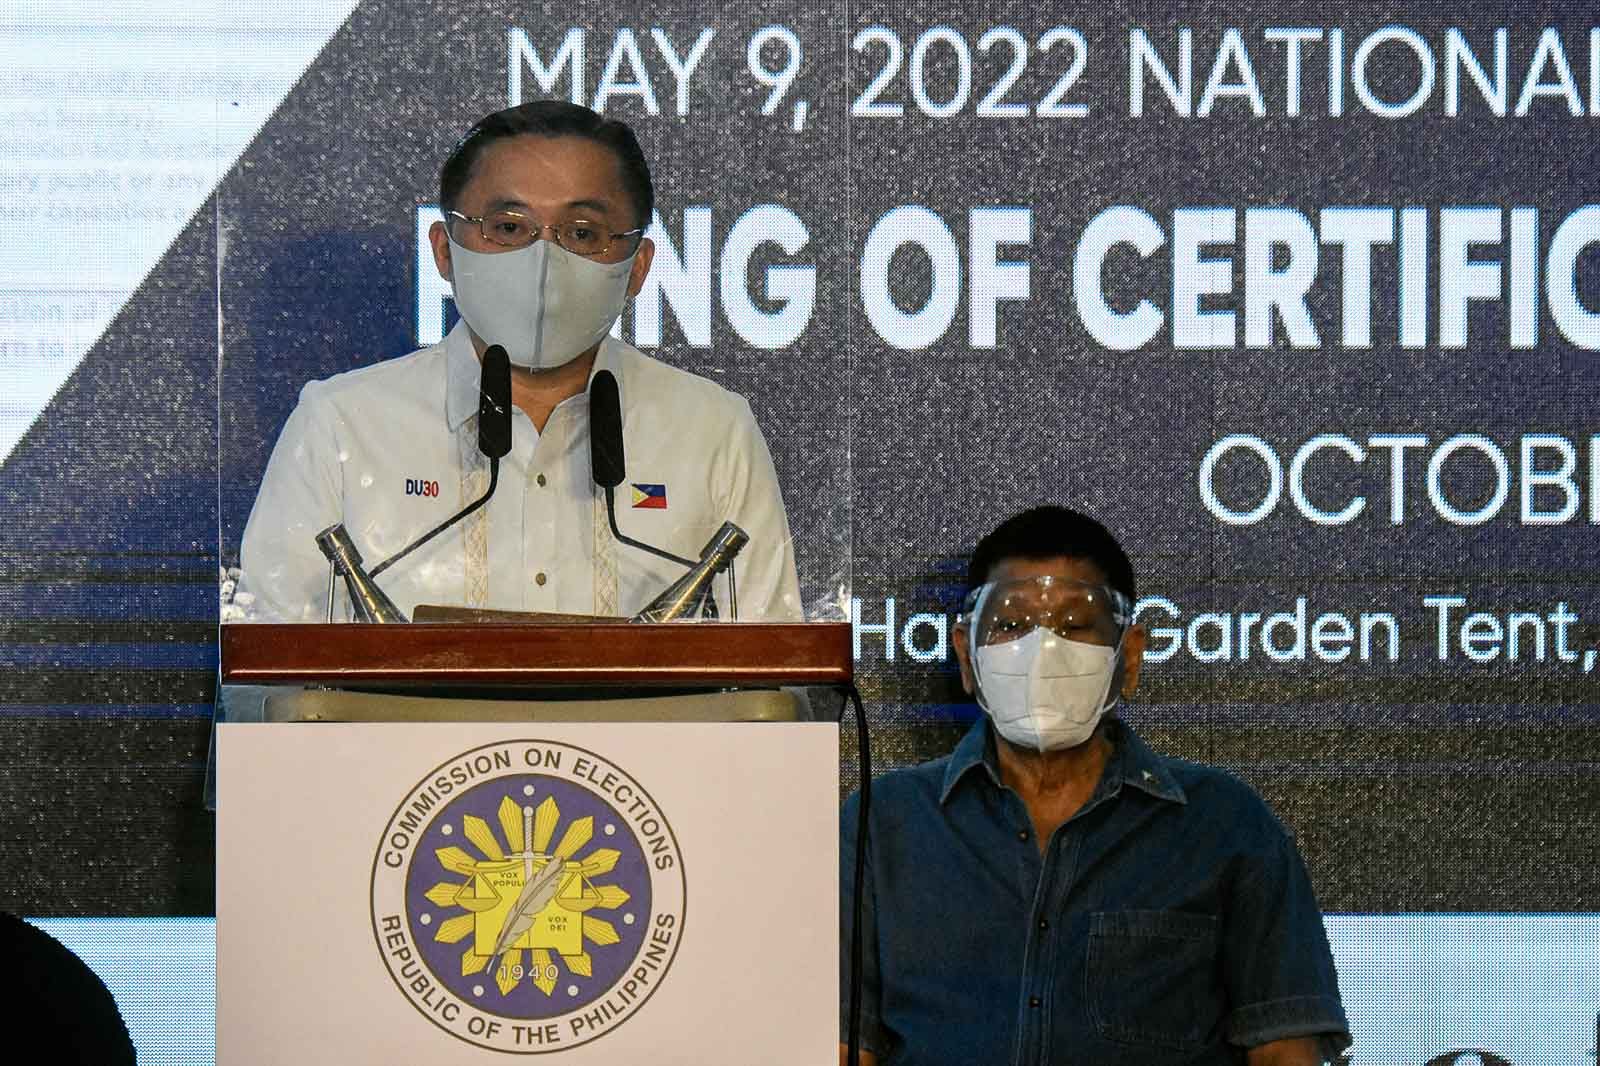 [In the Running] Day 2: COC filing heats up as Go runs for VP, Duterte retires from politics